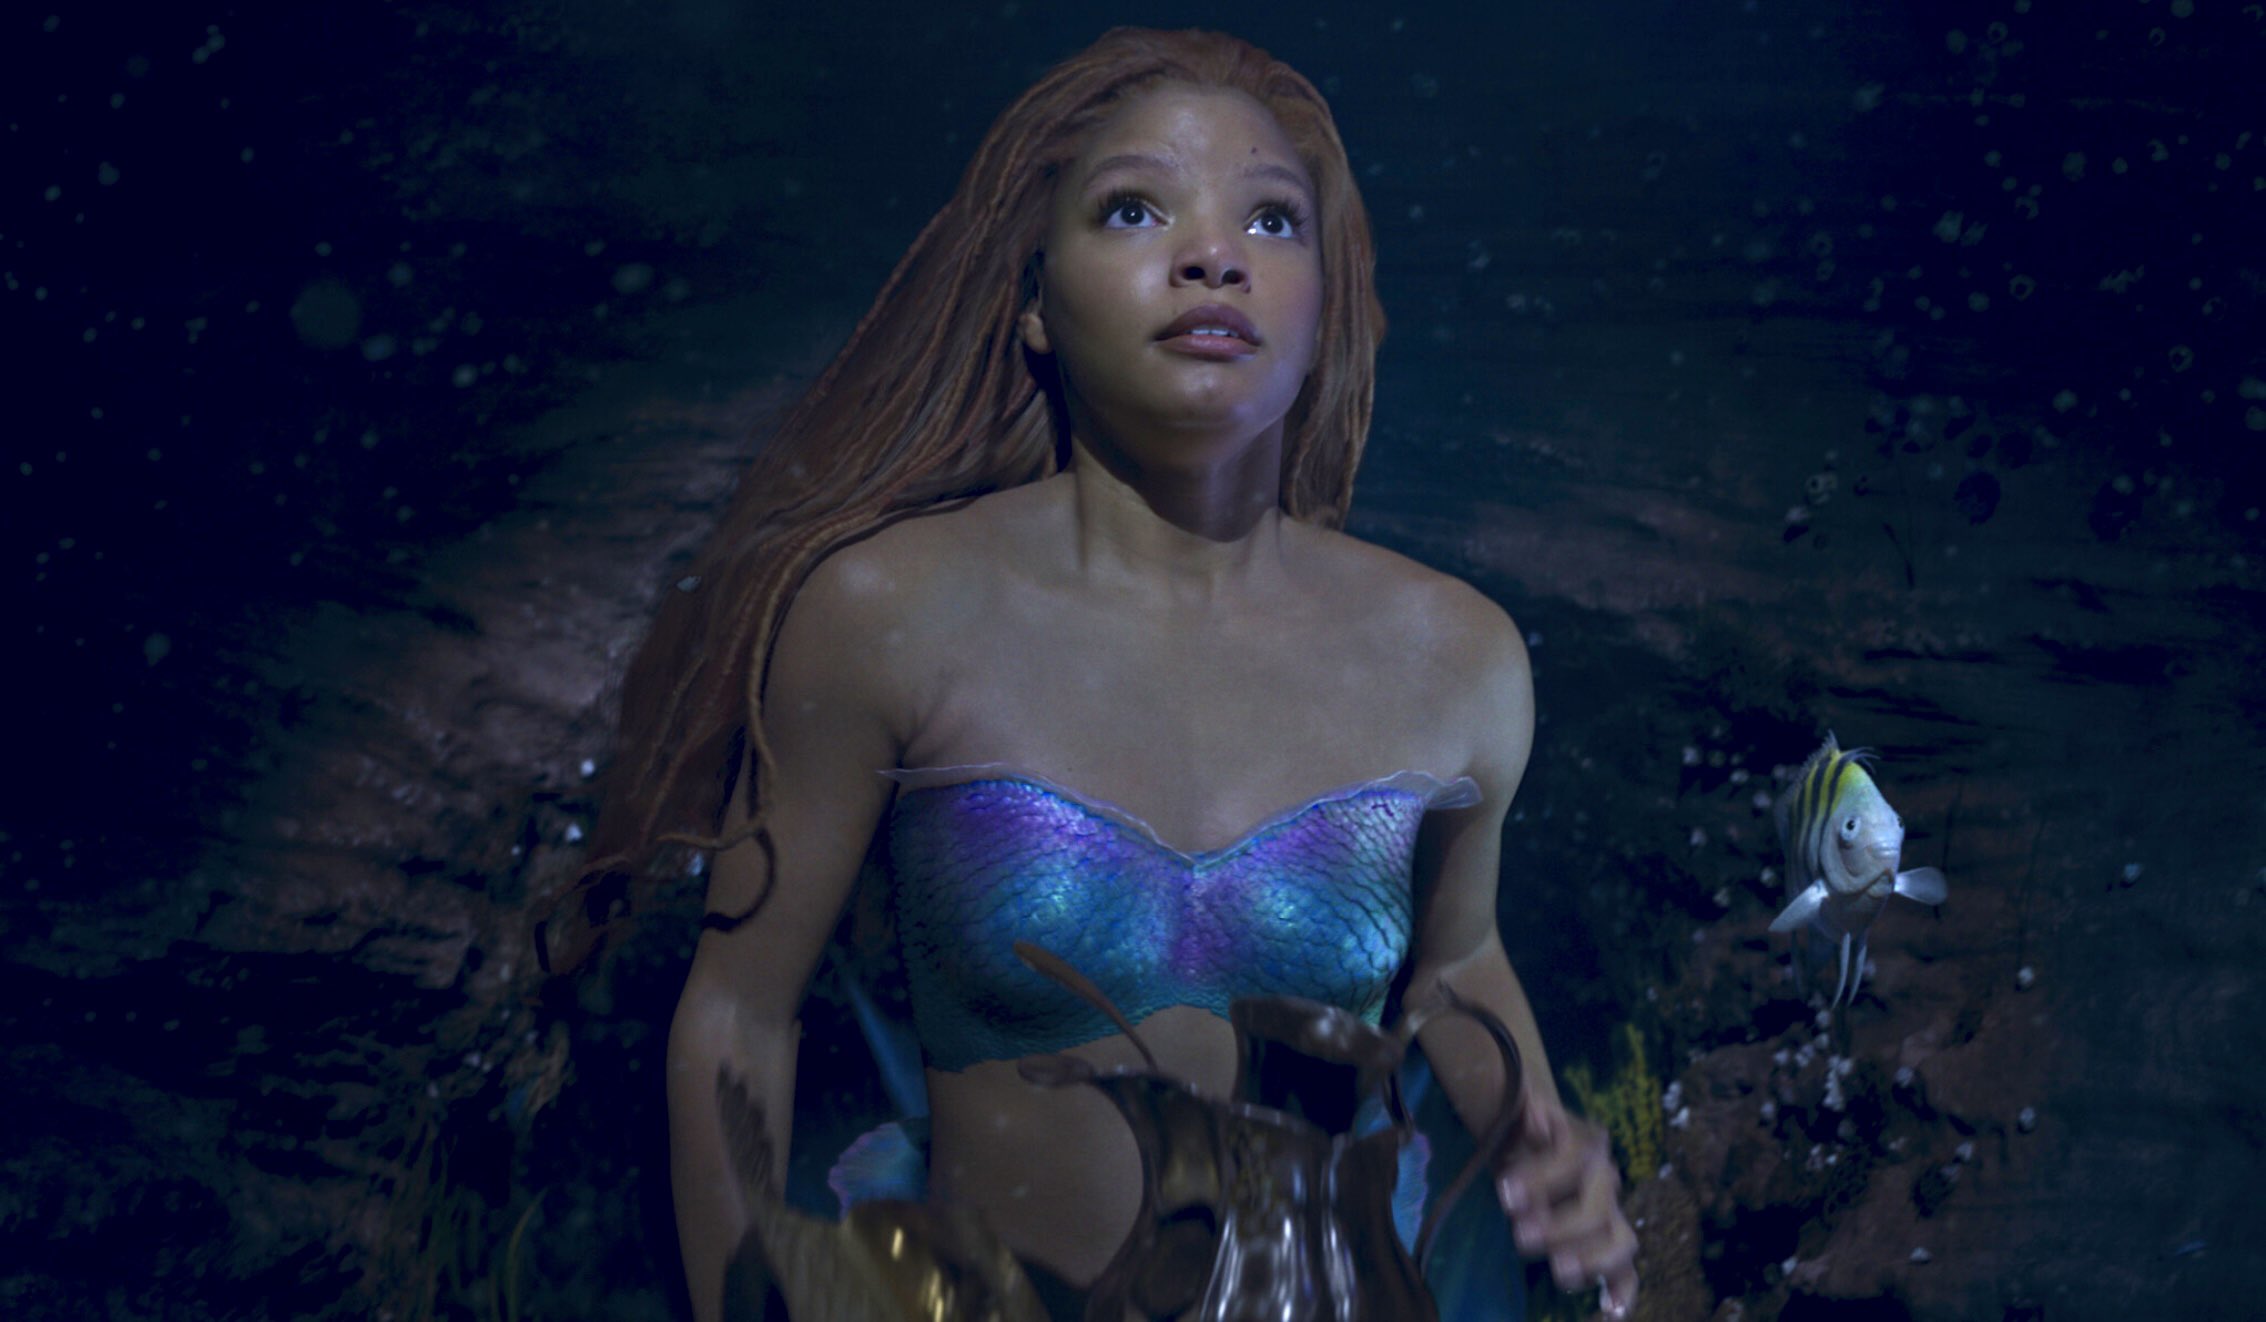 New Featurette For ‘The Little Mermaid’ Debuts